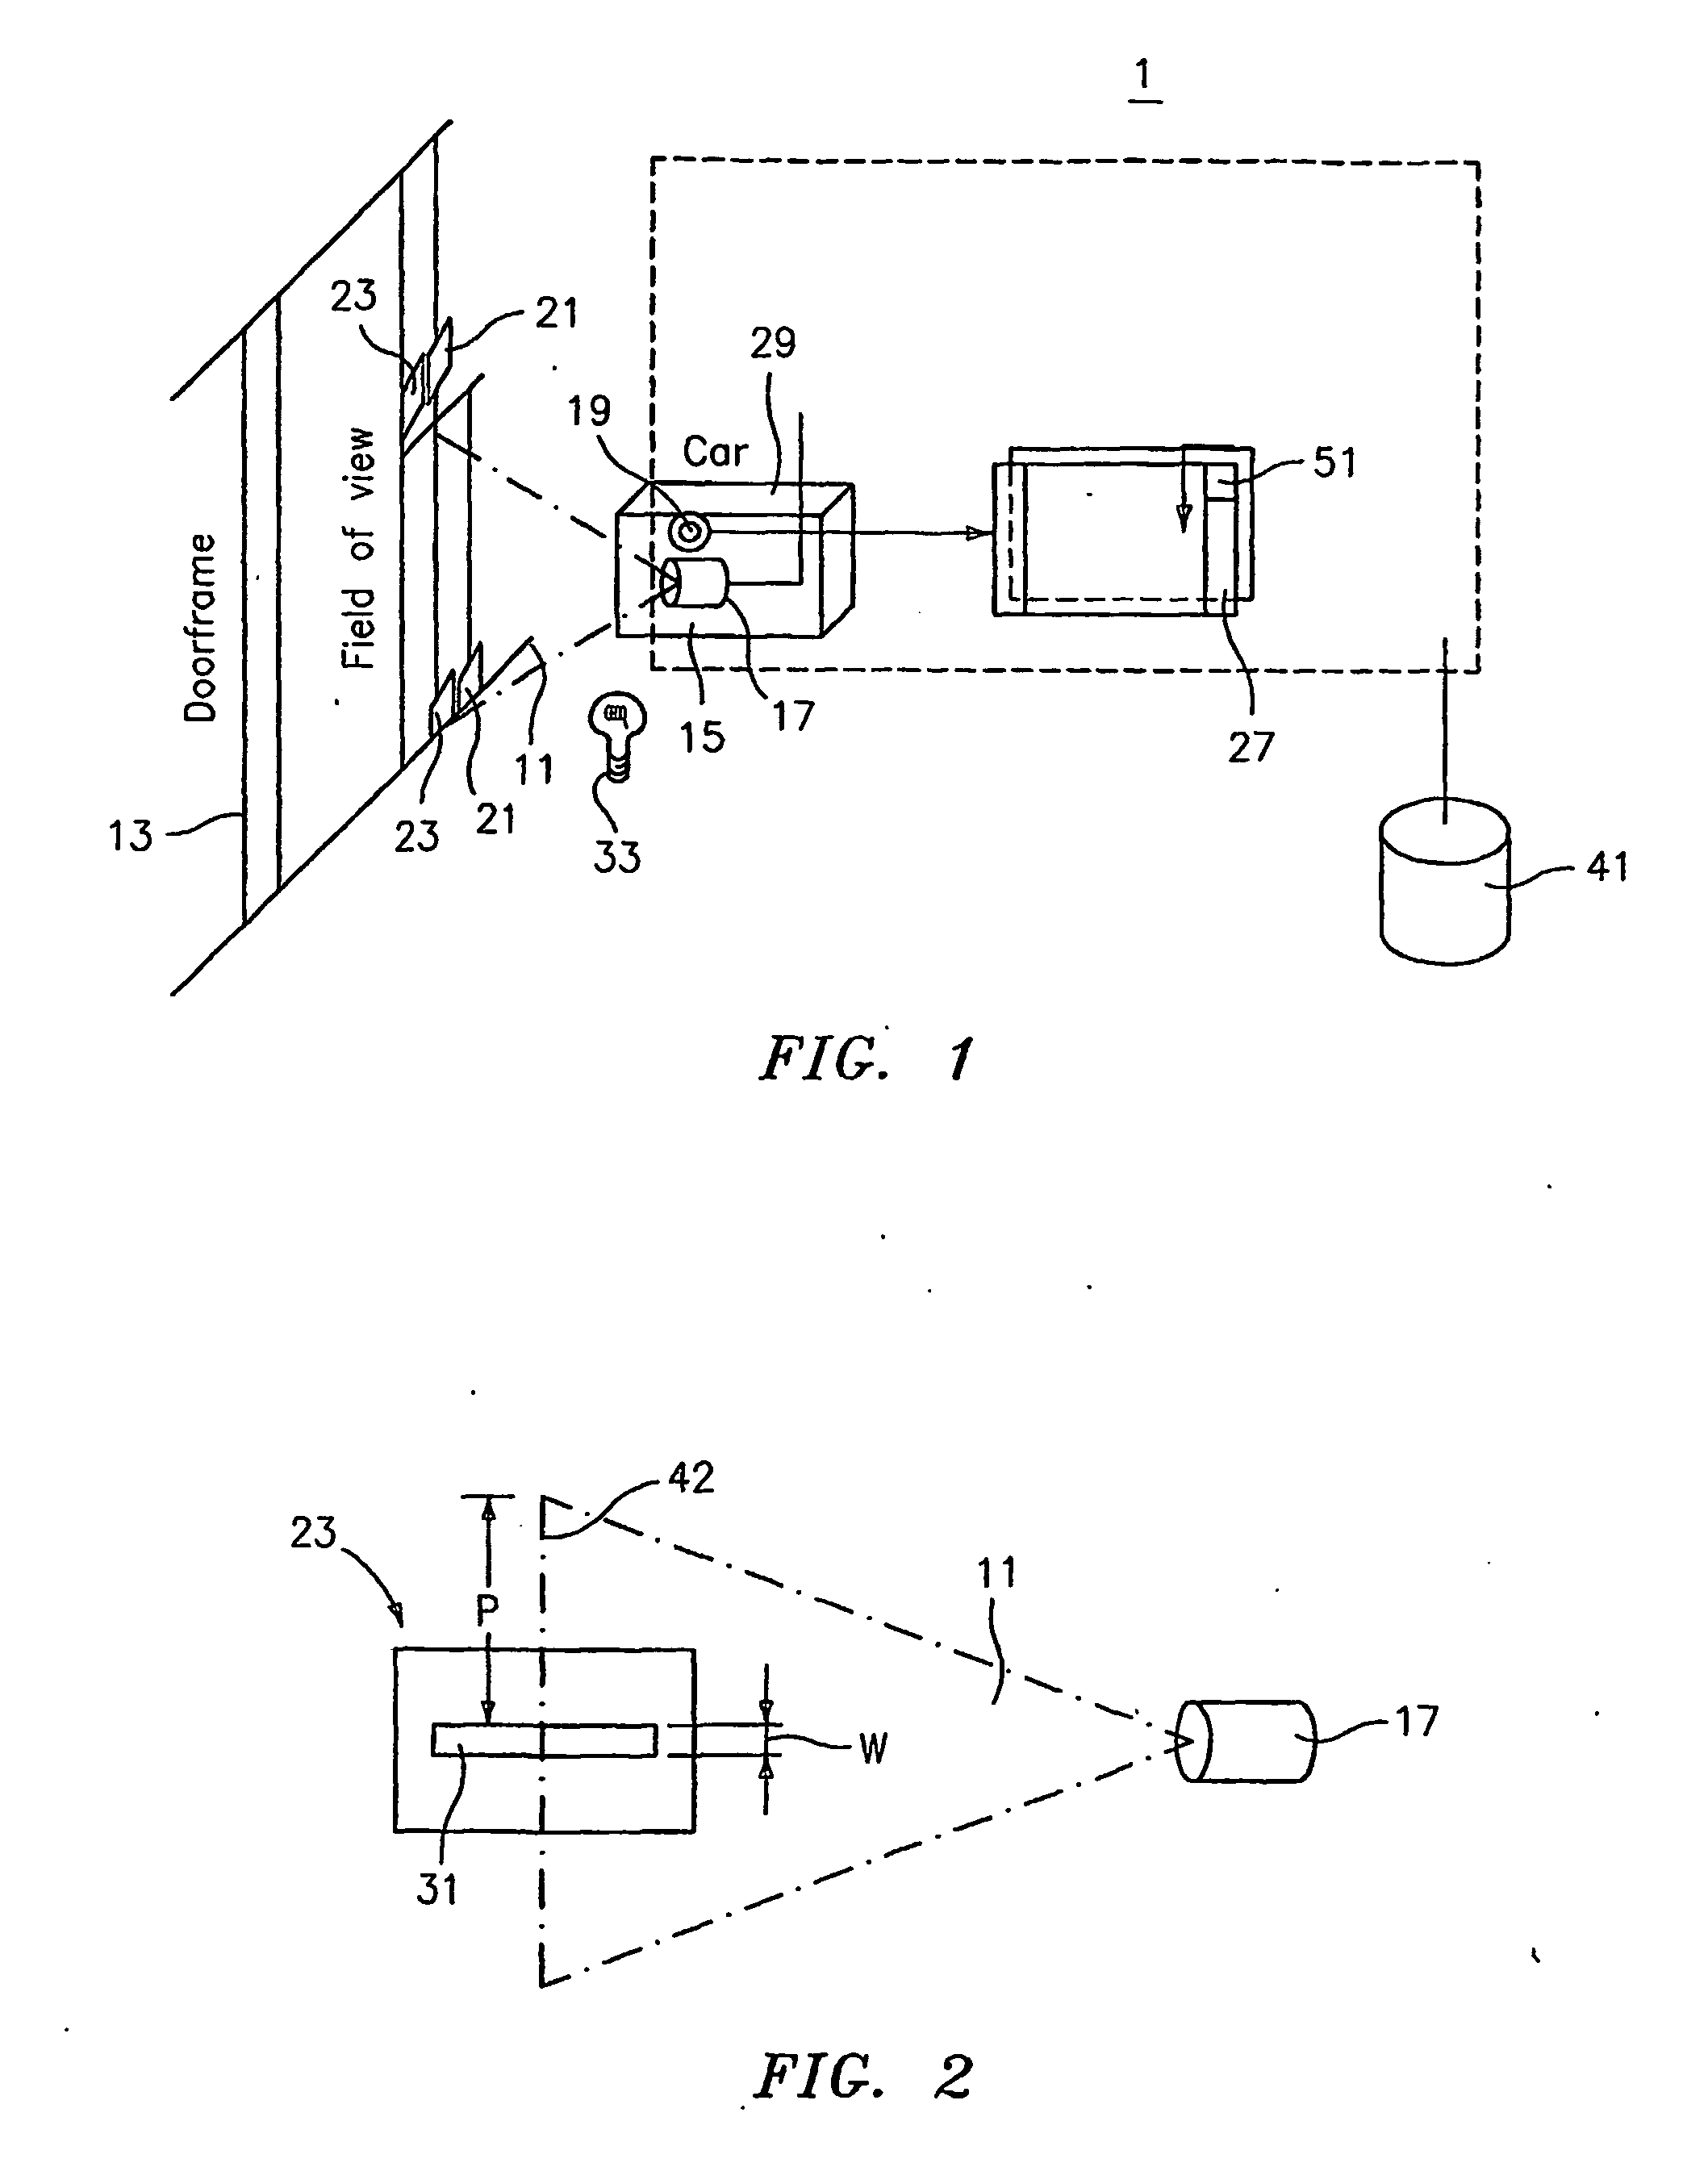 Rf id and low resolution ccd sensor based positioning system